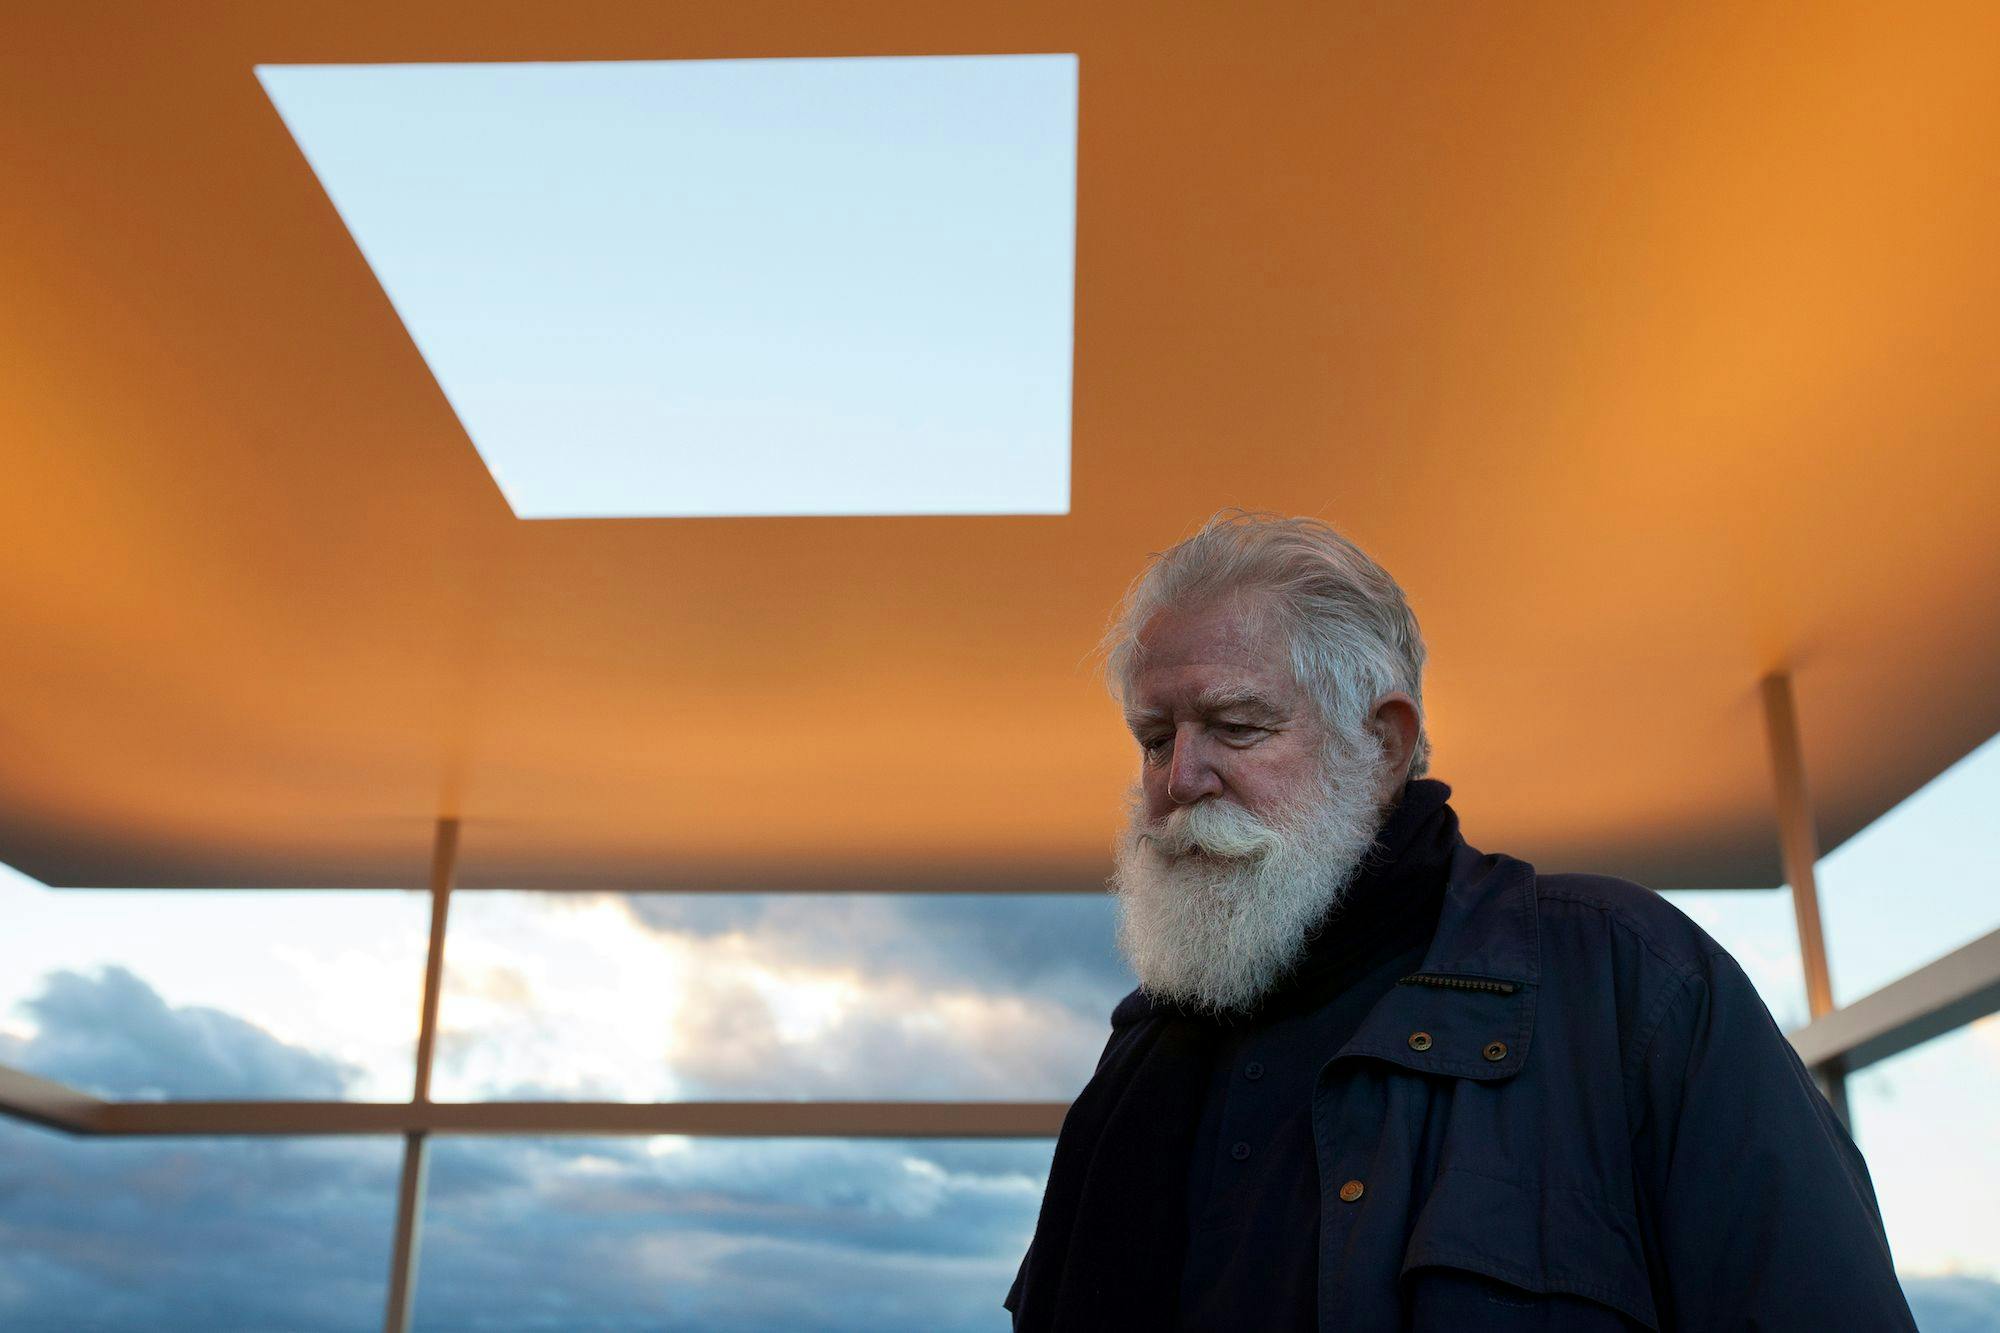 A white bearded James Turrell is gazing down at the ground. Above him, there is a large square hole in the roof, revealing the clouds in the sky beyond.